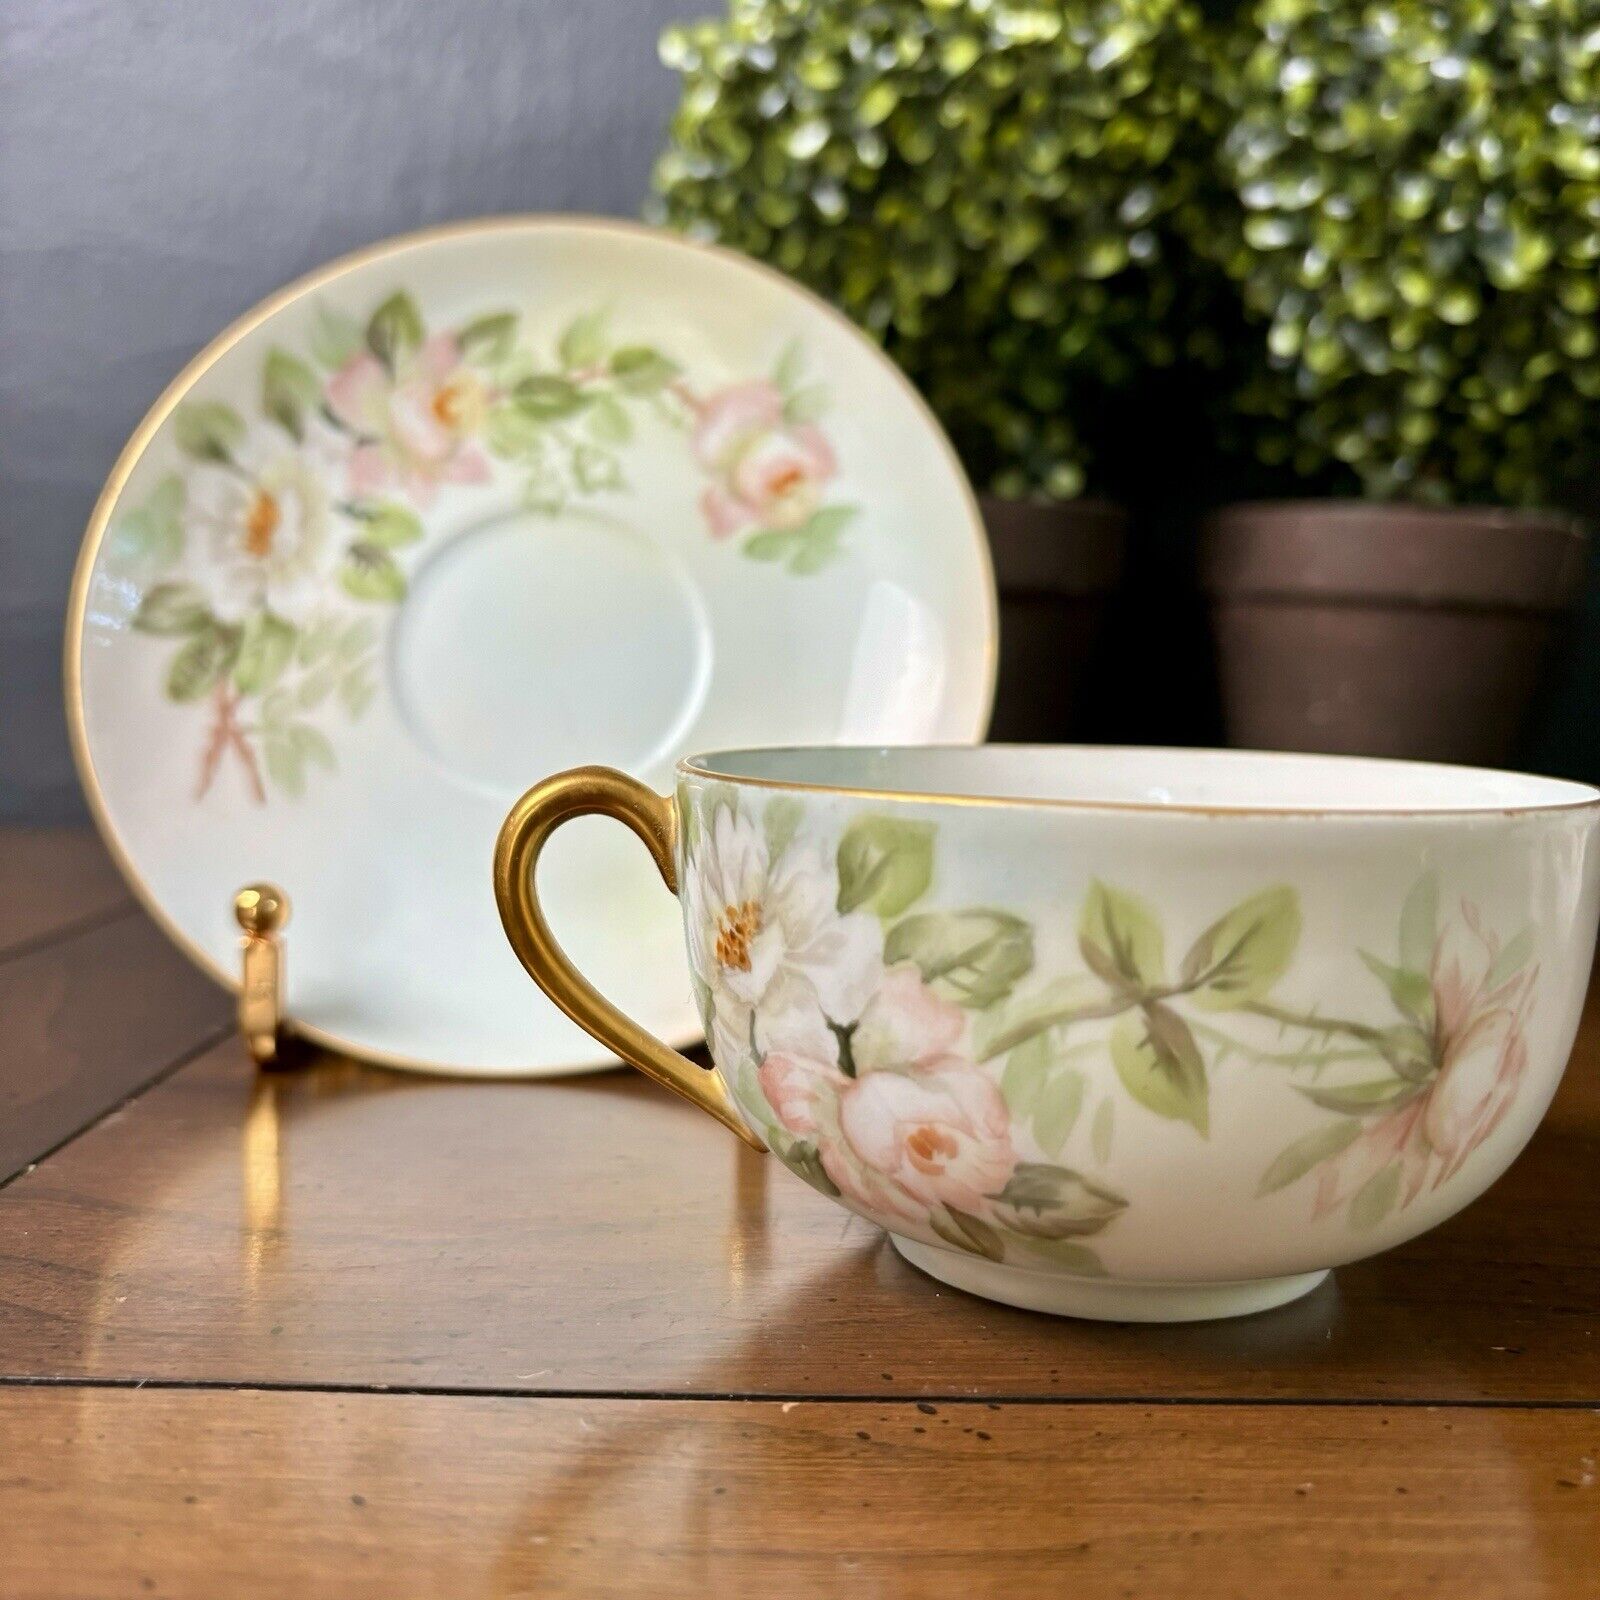 Antique T&V Limoges Hand Painted PEACH & WHITE ROSES Tea Cup Saucer  2 -pc Set